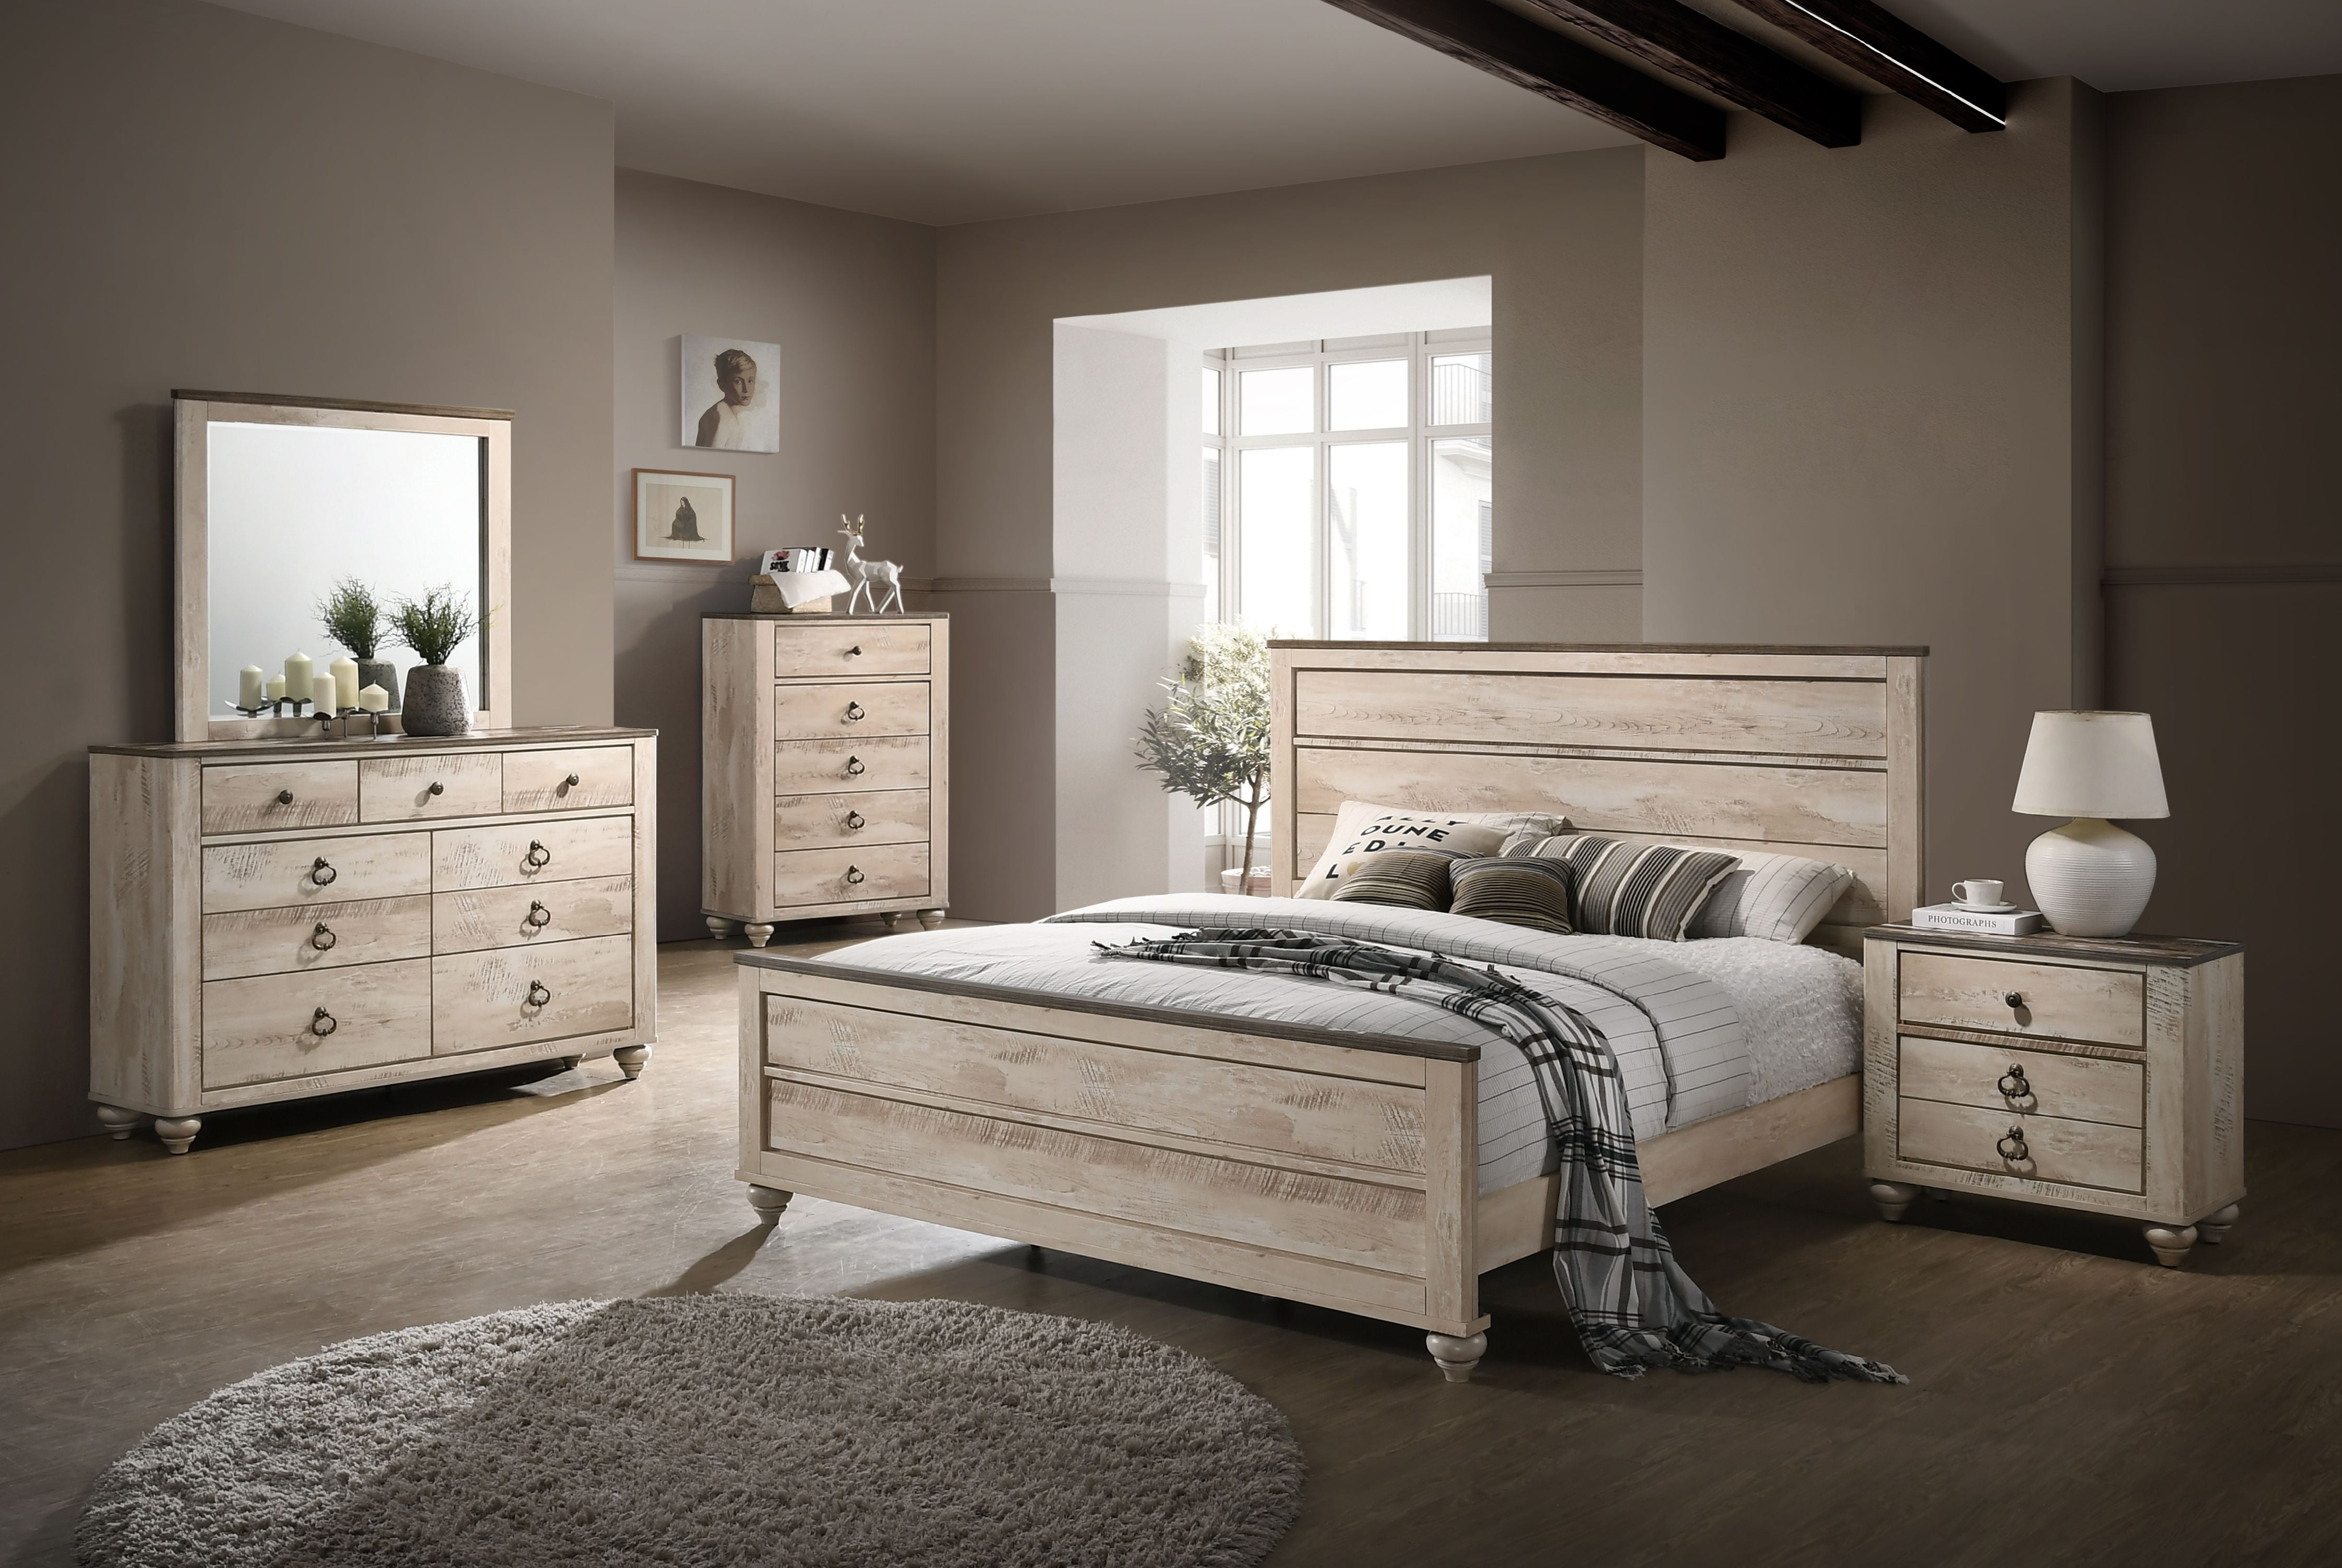 Roundhill Imerland Contemporary White Wash Finish Bedroom Set, King Bed